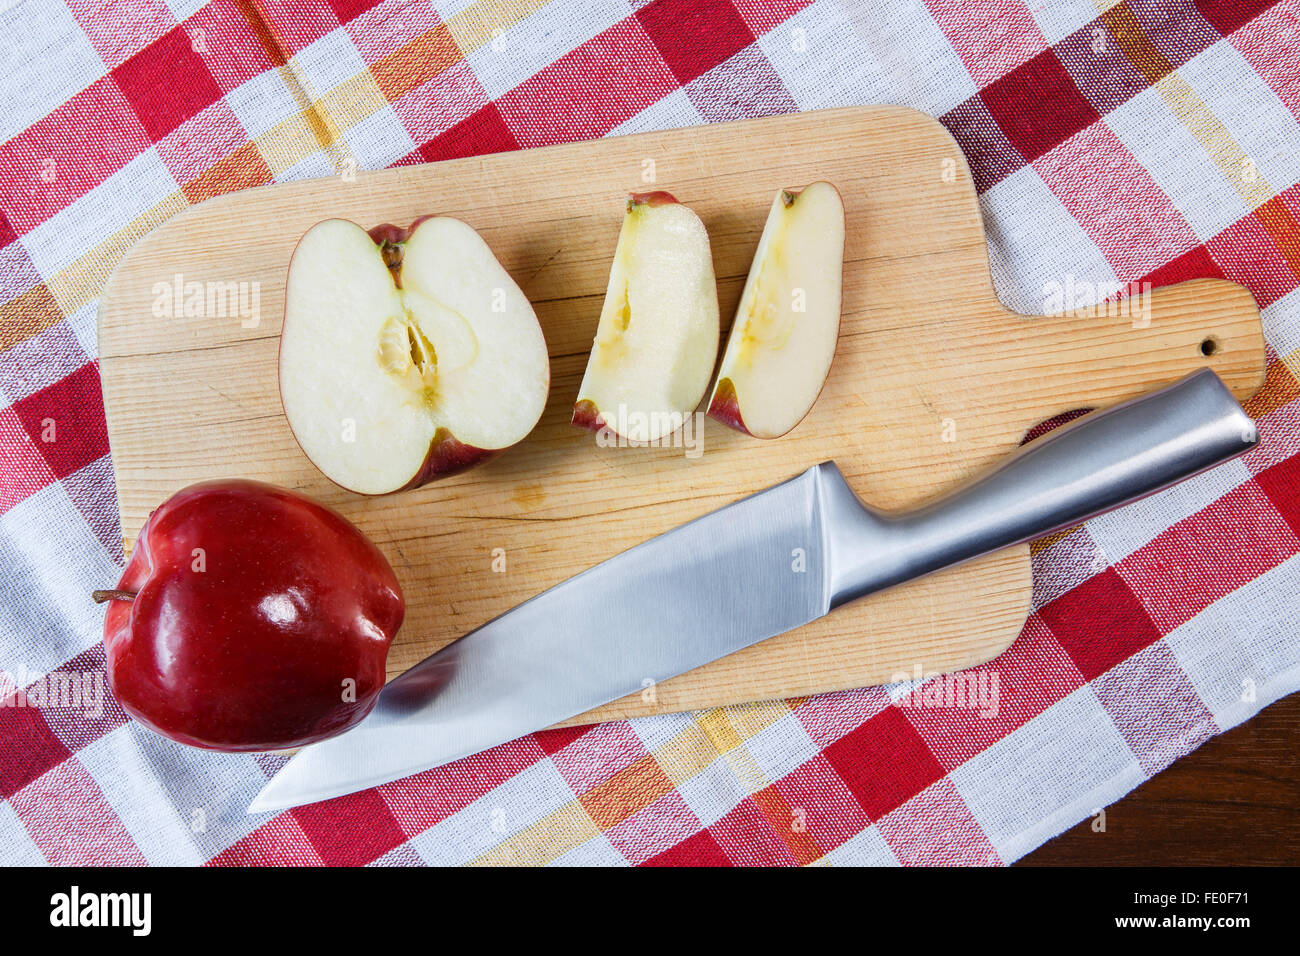 Red apple on cutting board with stainless steel knife Stock Photo